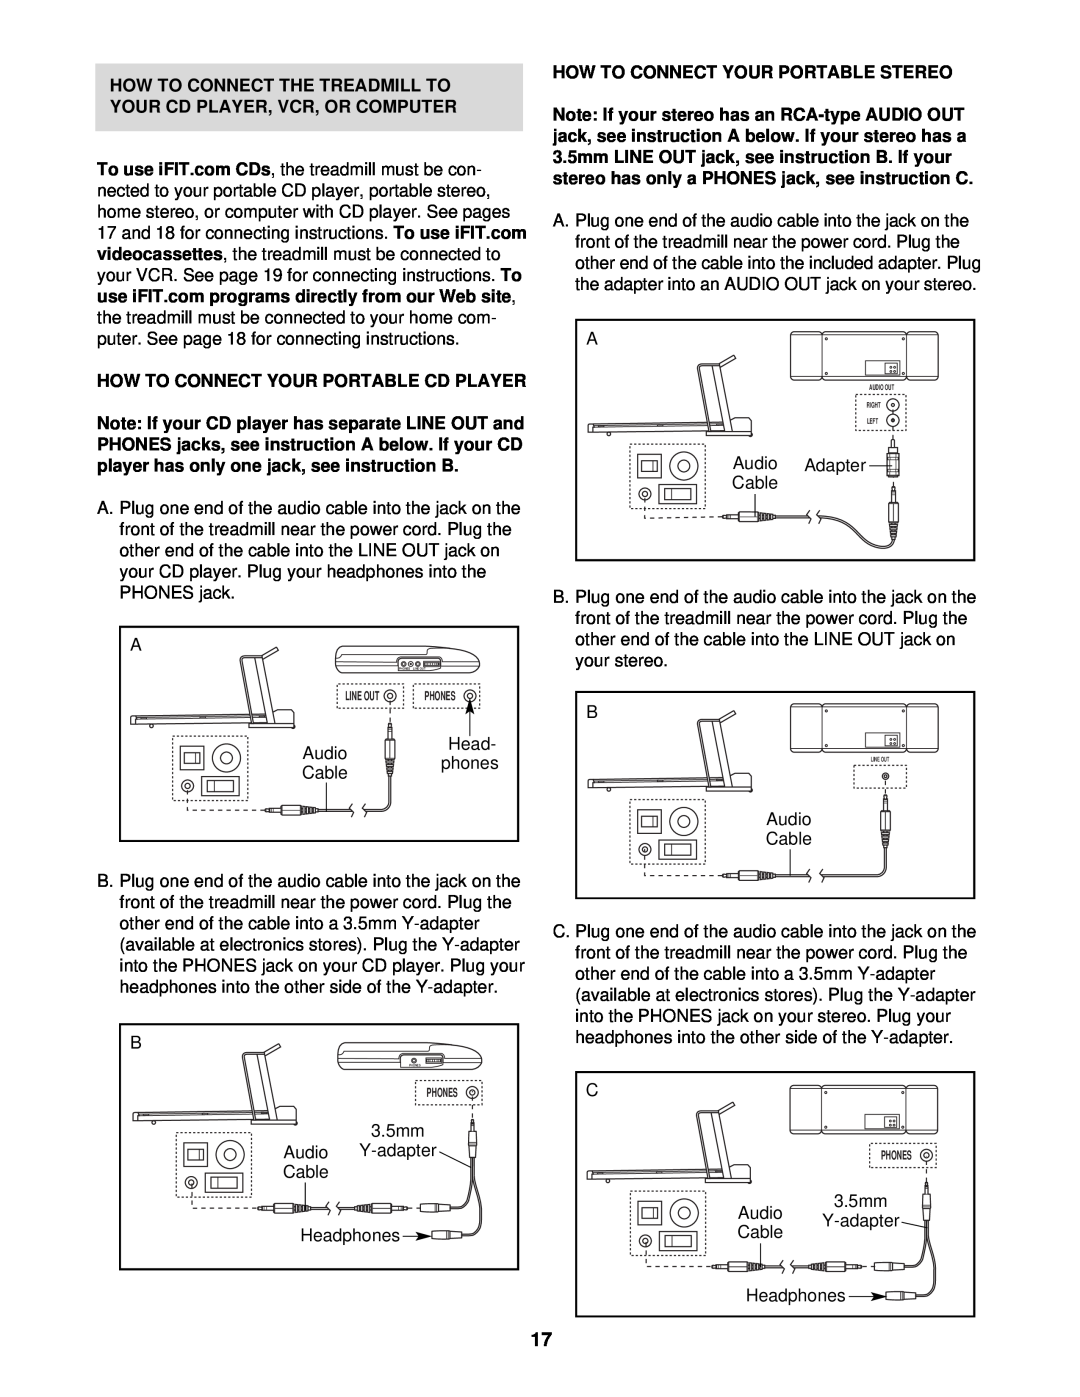 Reebok Fitness RBTL14910 manual How To Connect The Treadmill To Your Cd Player, Vcr, Or Computer, Phones 